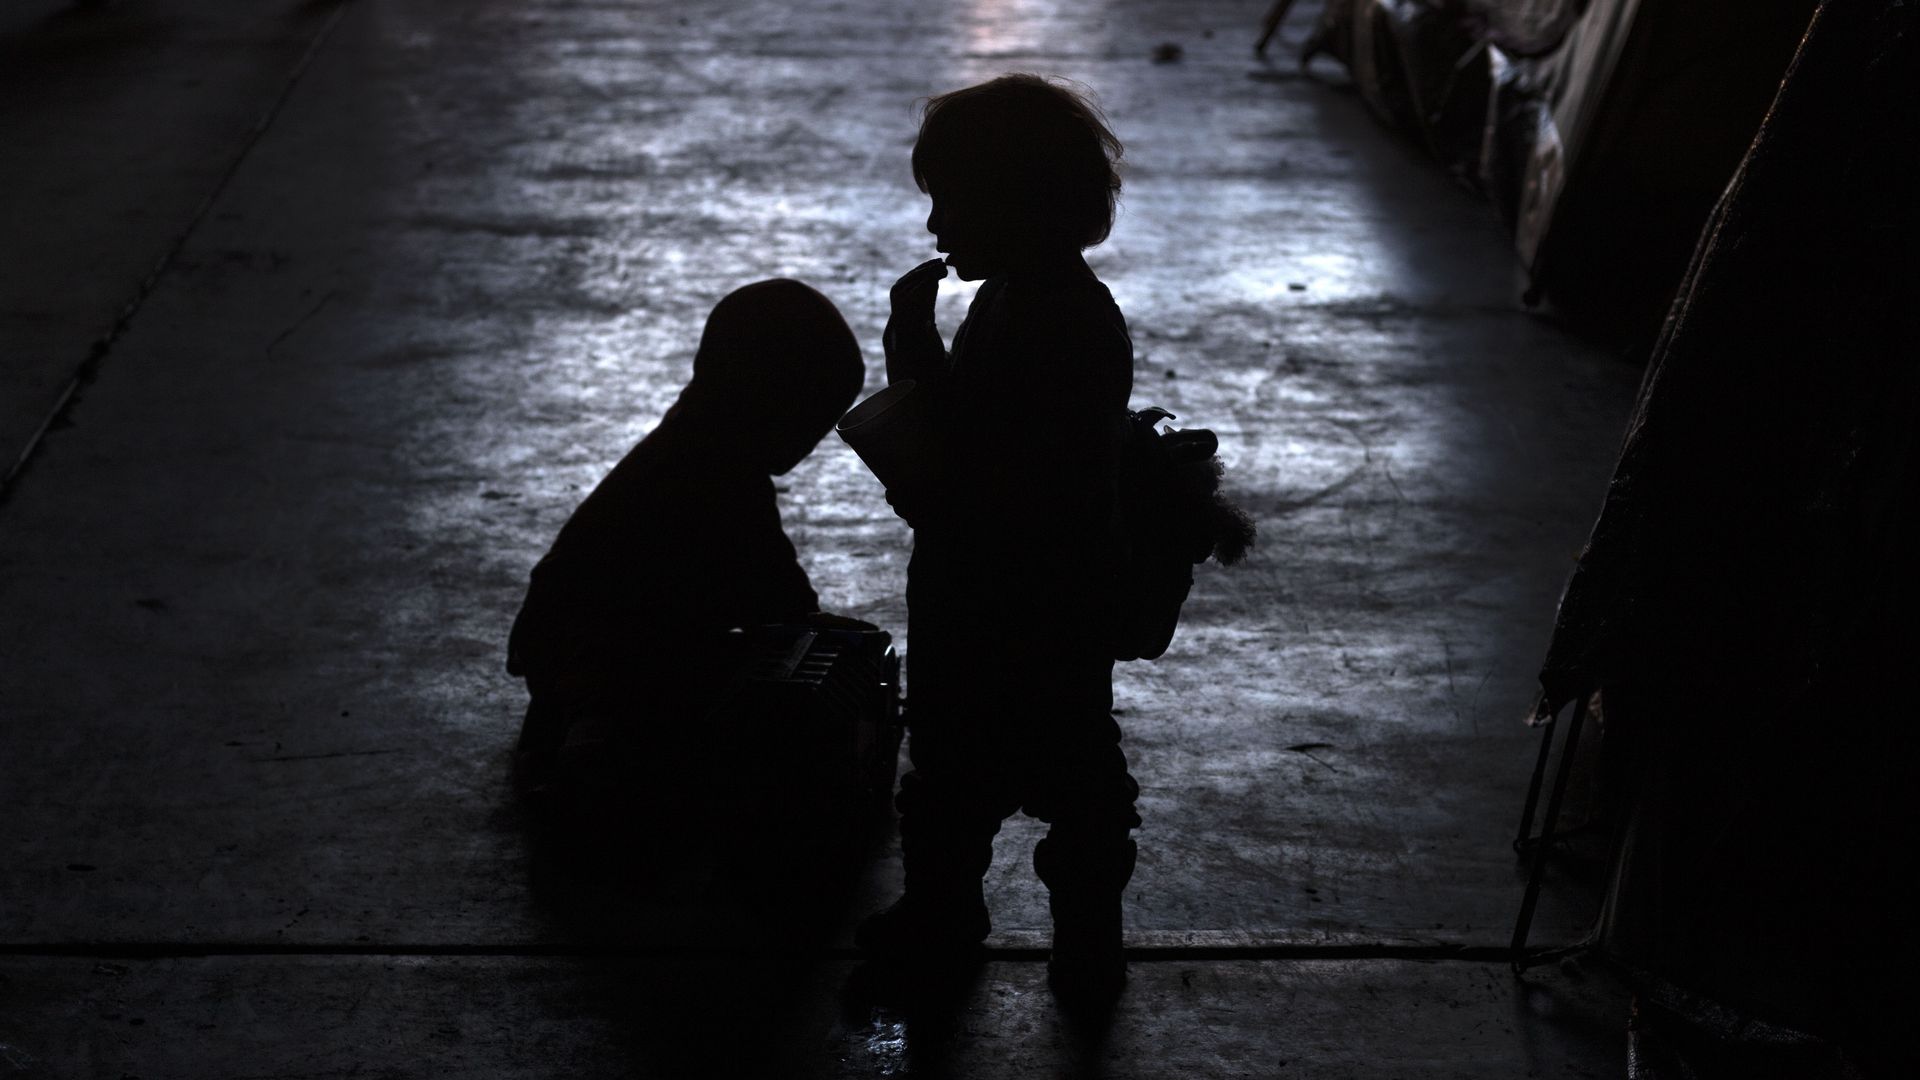 Silhouettes of two young, migrant children at night by the border